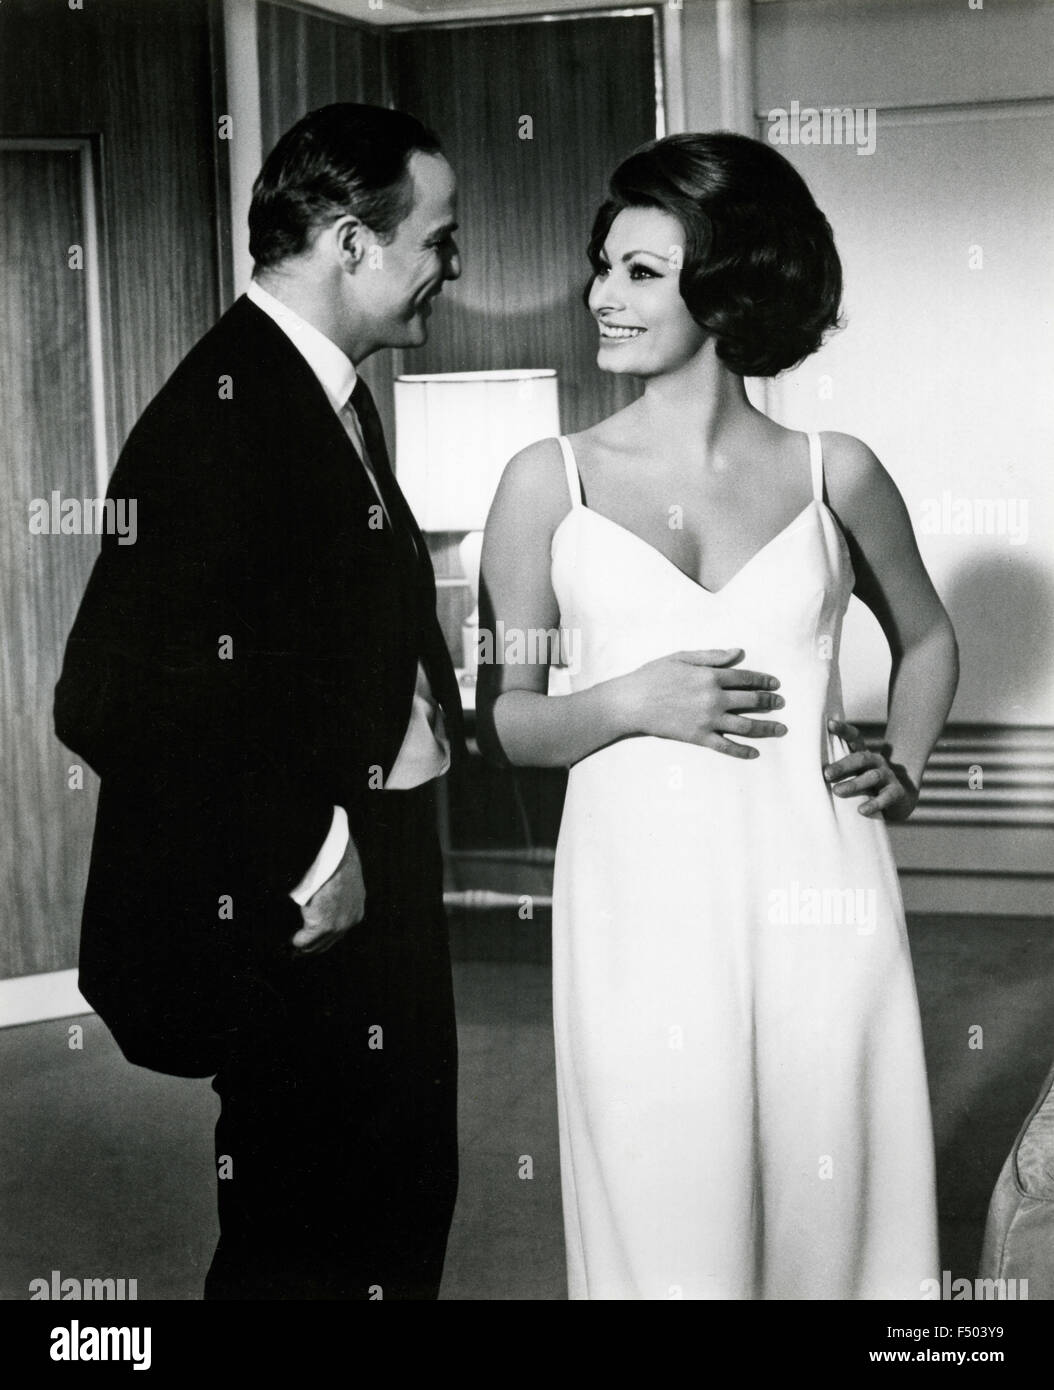 The actors Sophia Loren and Marlon Brando in a scene from the film 'A Countess from Hong Kong' Stock Photo